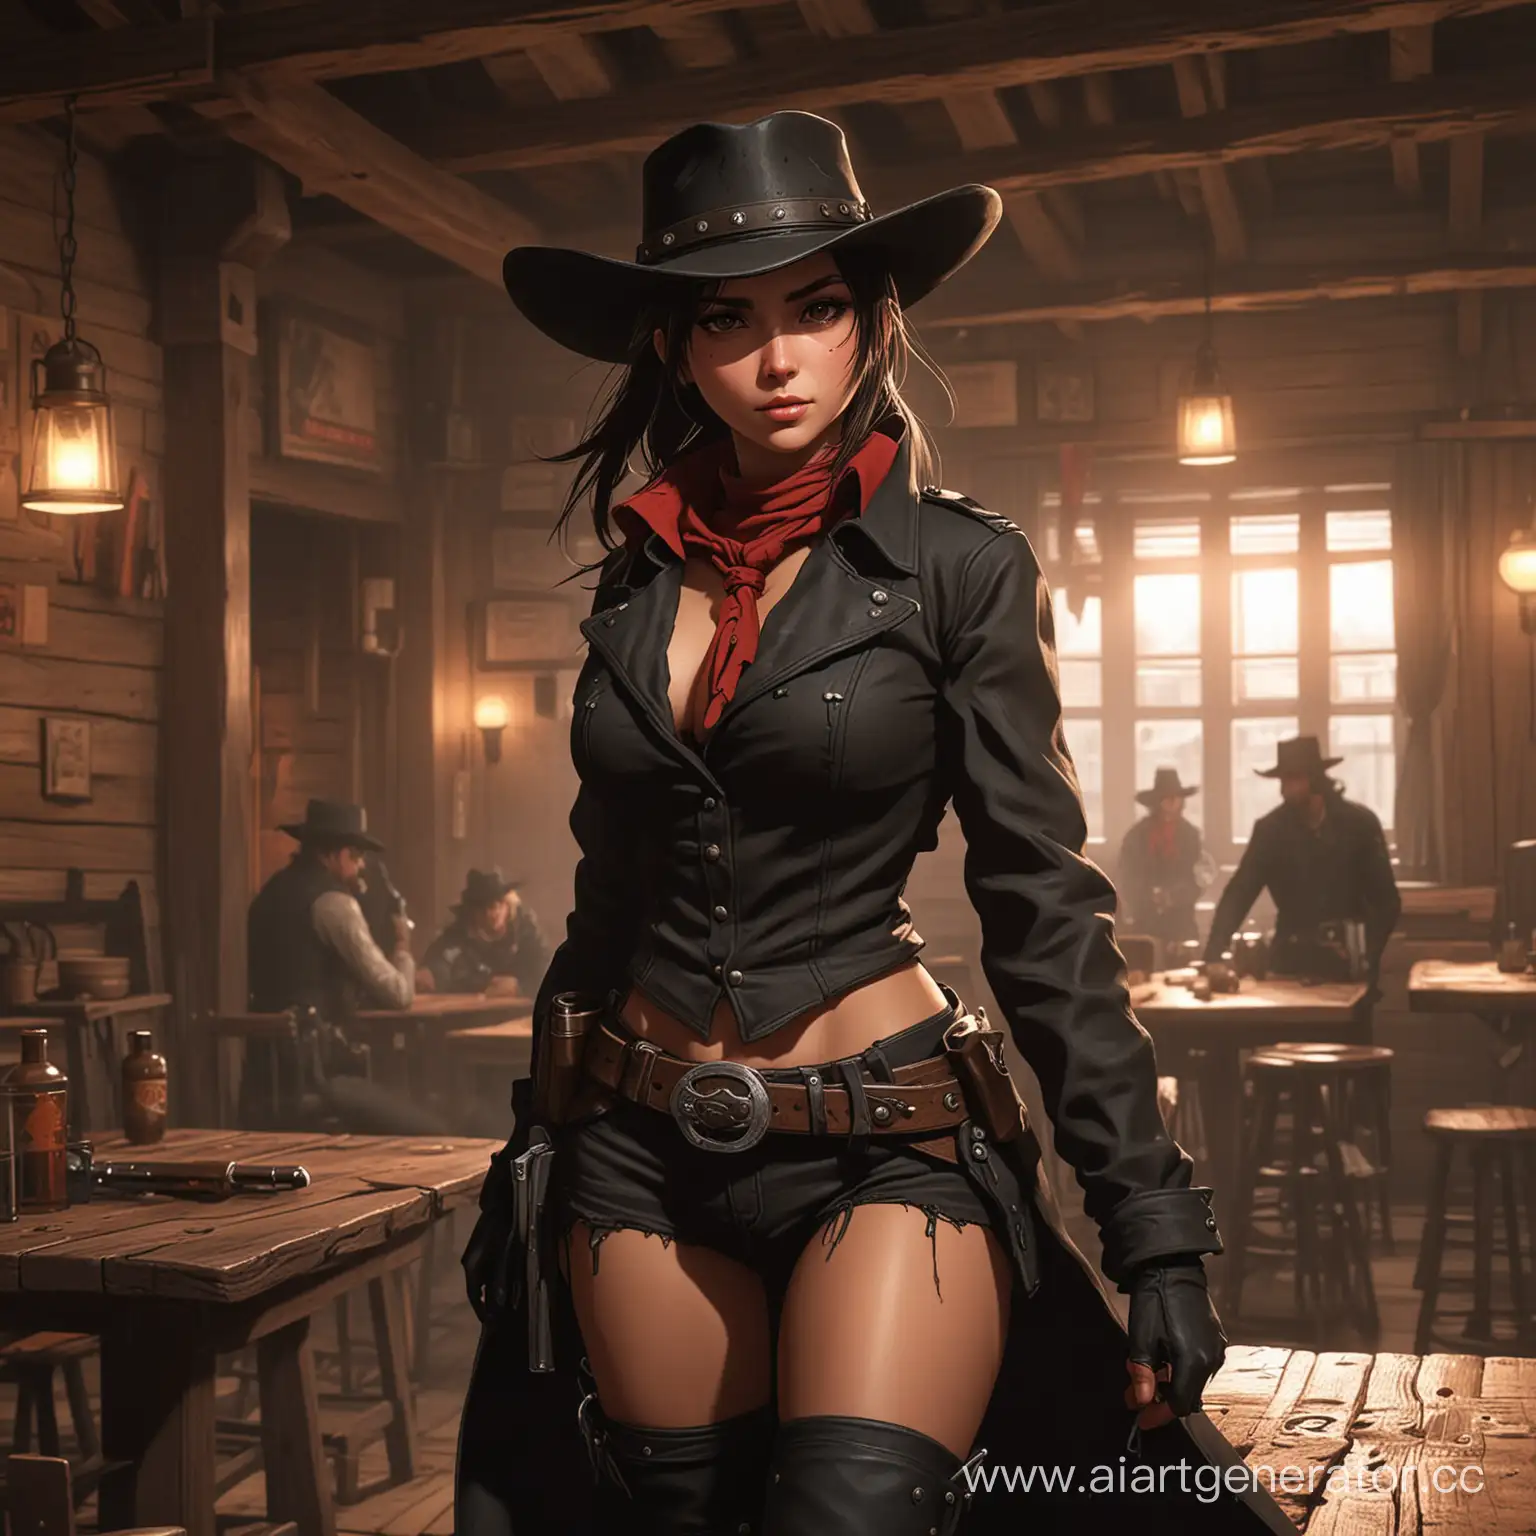 Anime-Cowboy-Girl-Breaks-into-Tavern-with-Revolvers-in-Western-Film-Style